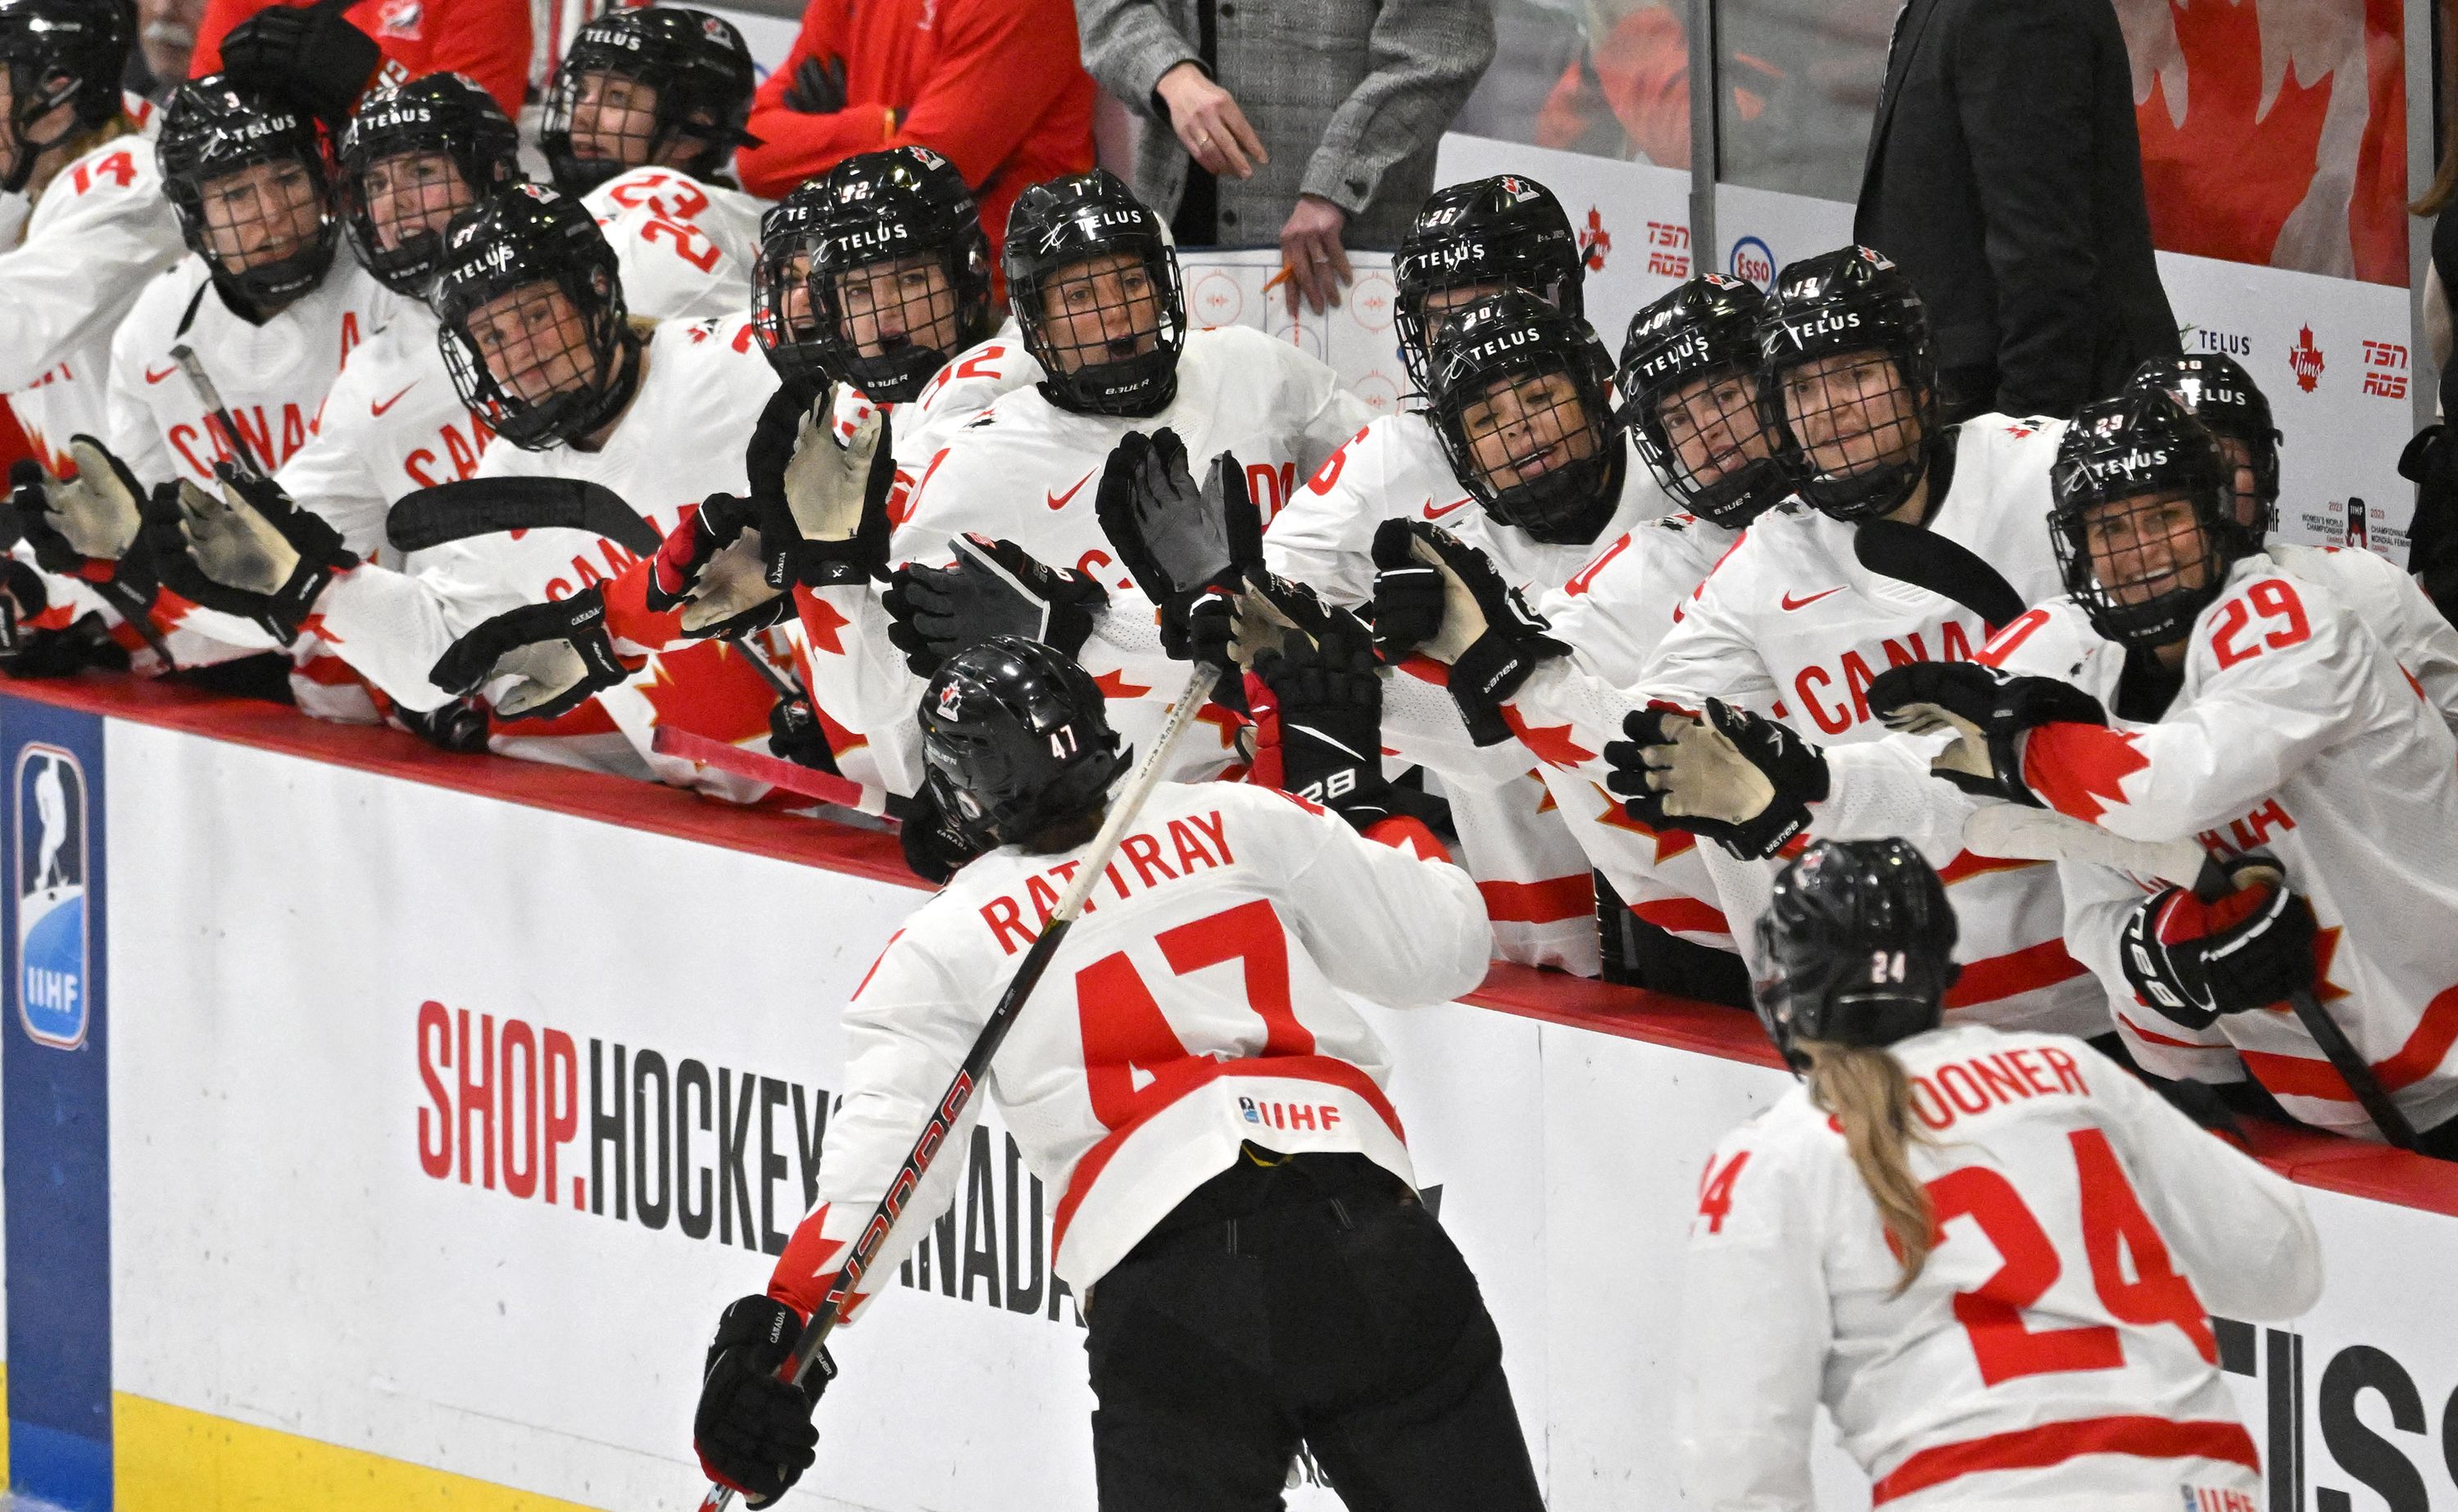 2022 Olympic: US women's hockey faces challenge vs. Canada